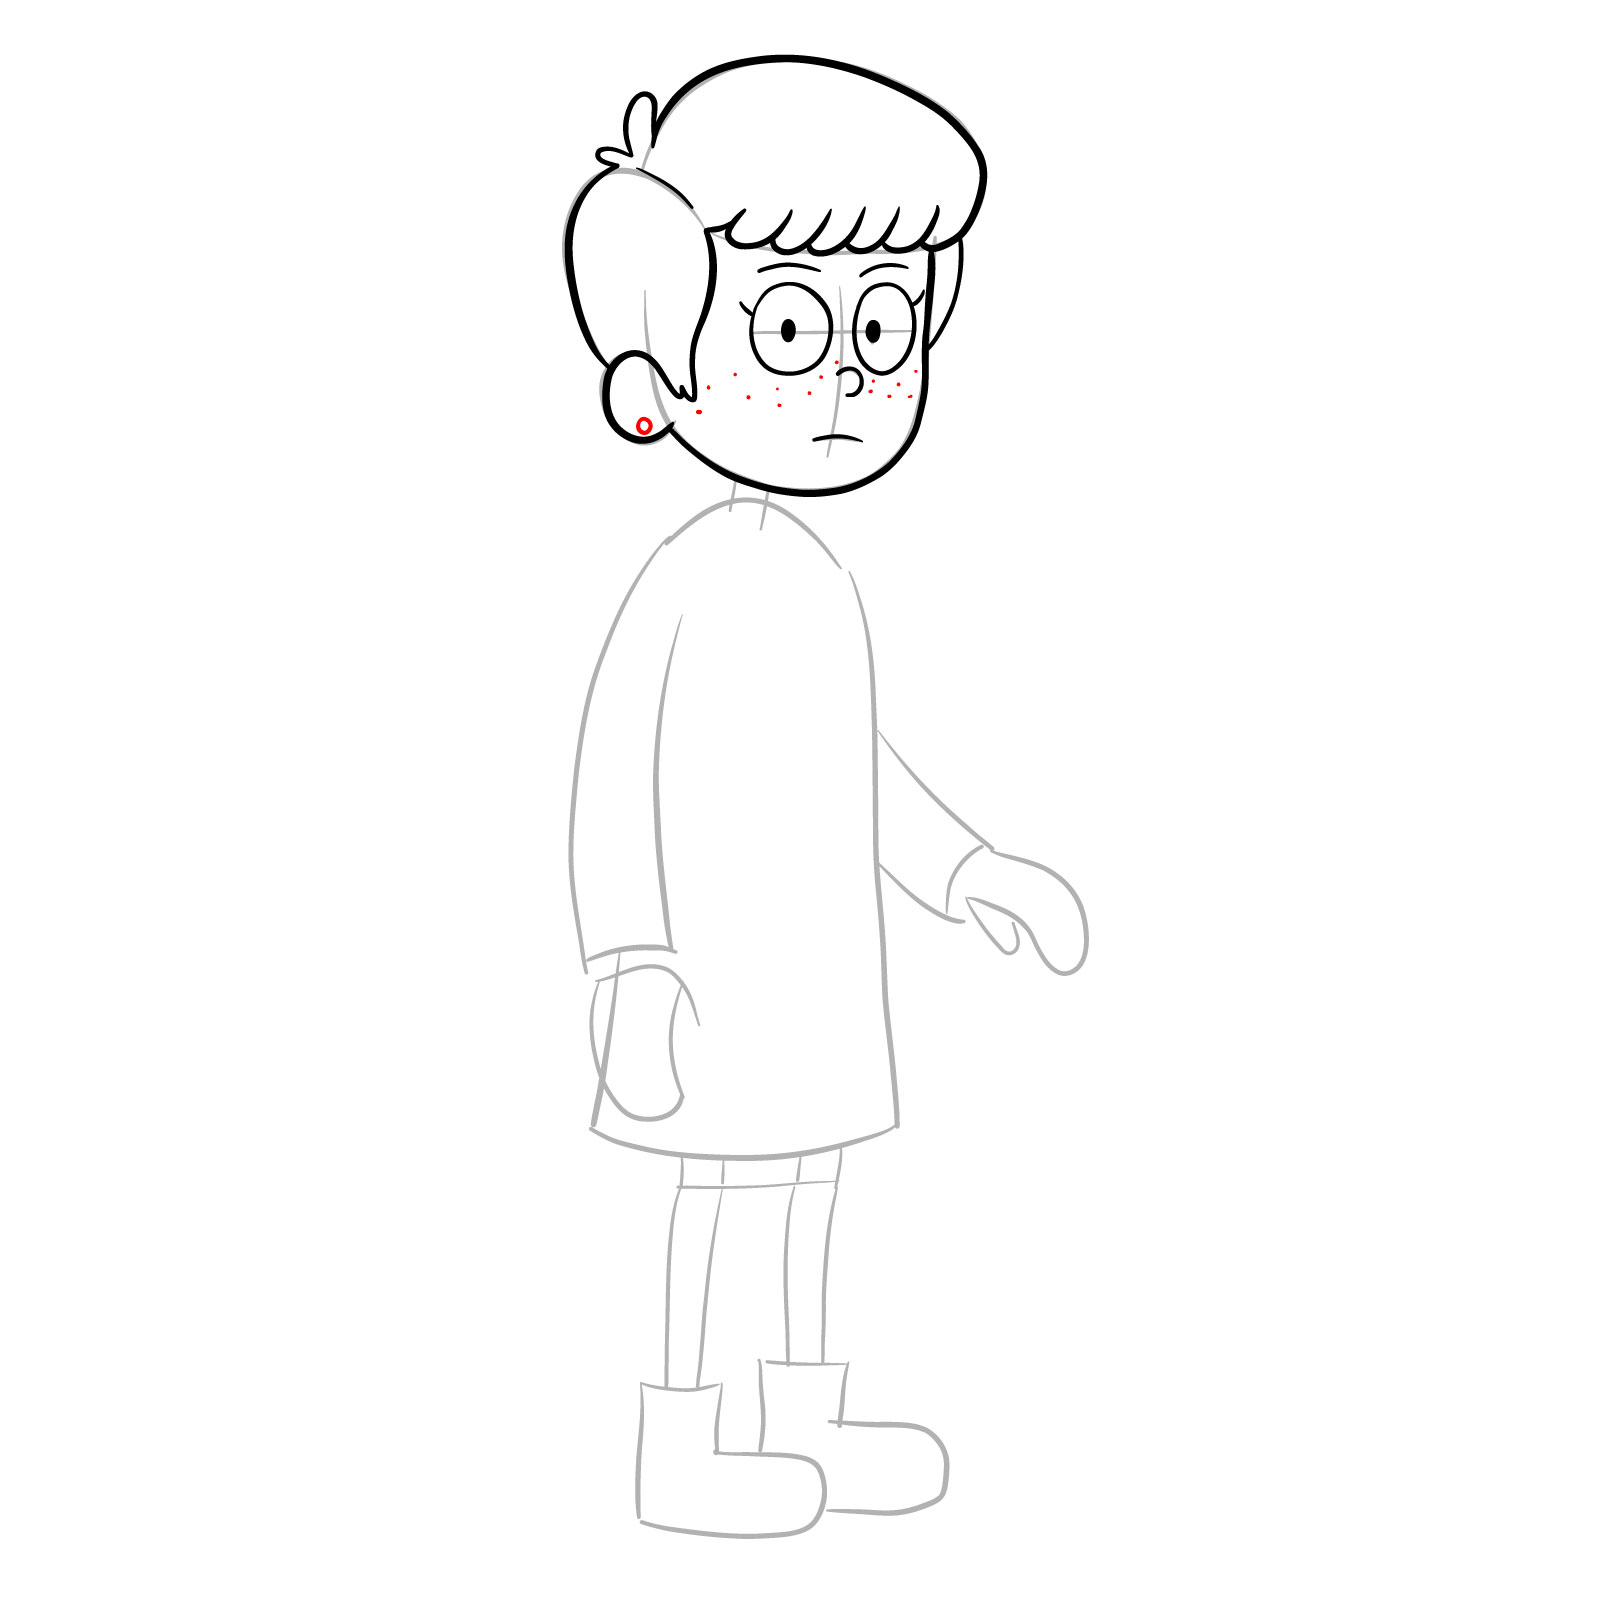 How to draw Terri from Amphibia - step 11